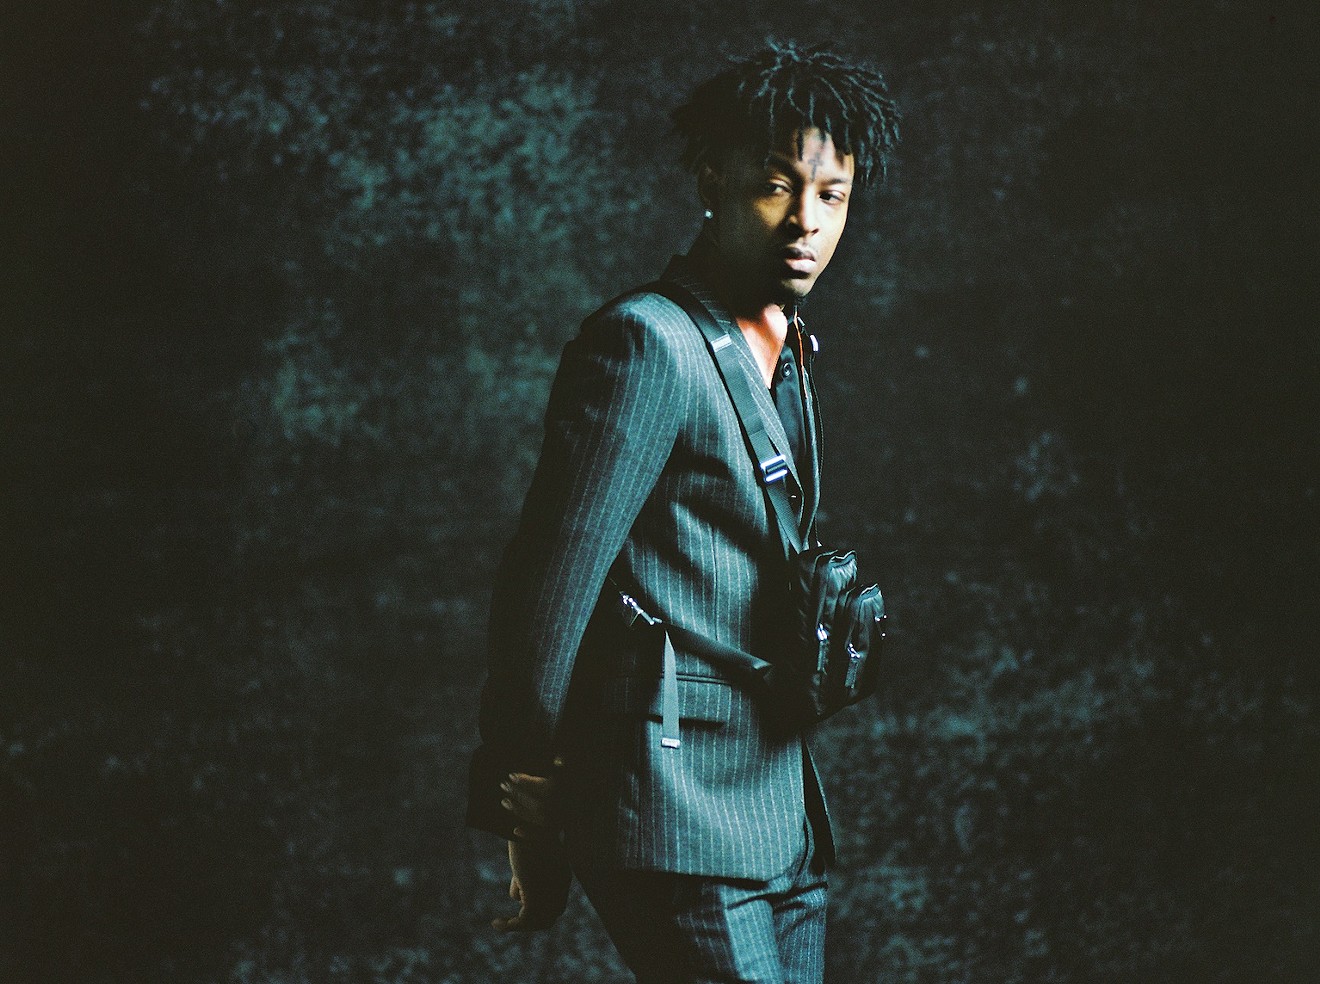 21 Savage is scheduled to perform on Tuesday, July 16, at Comerica Theatre.